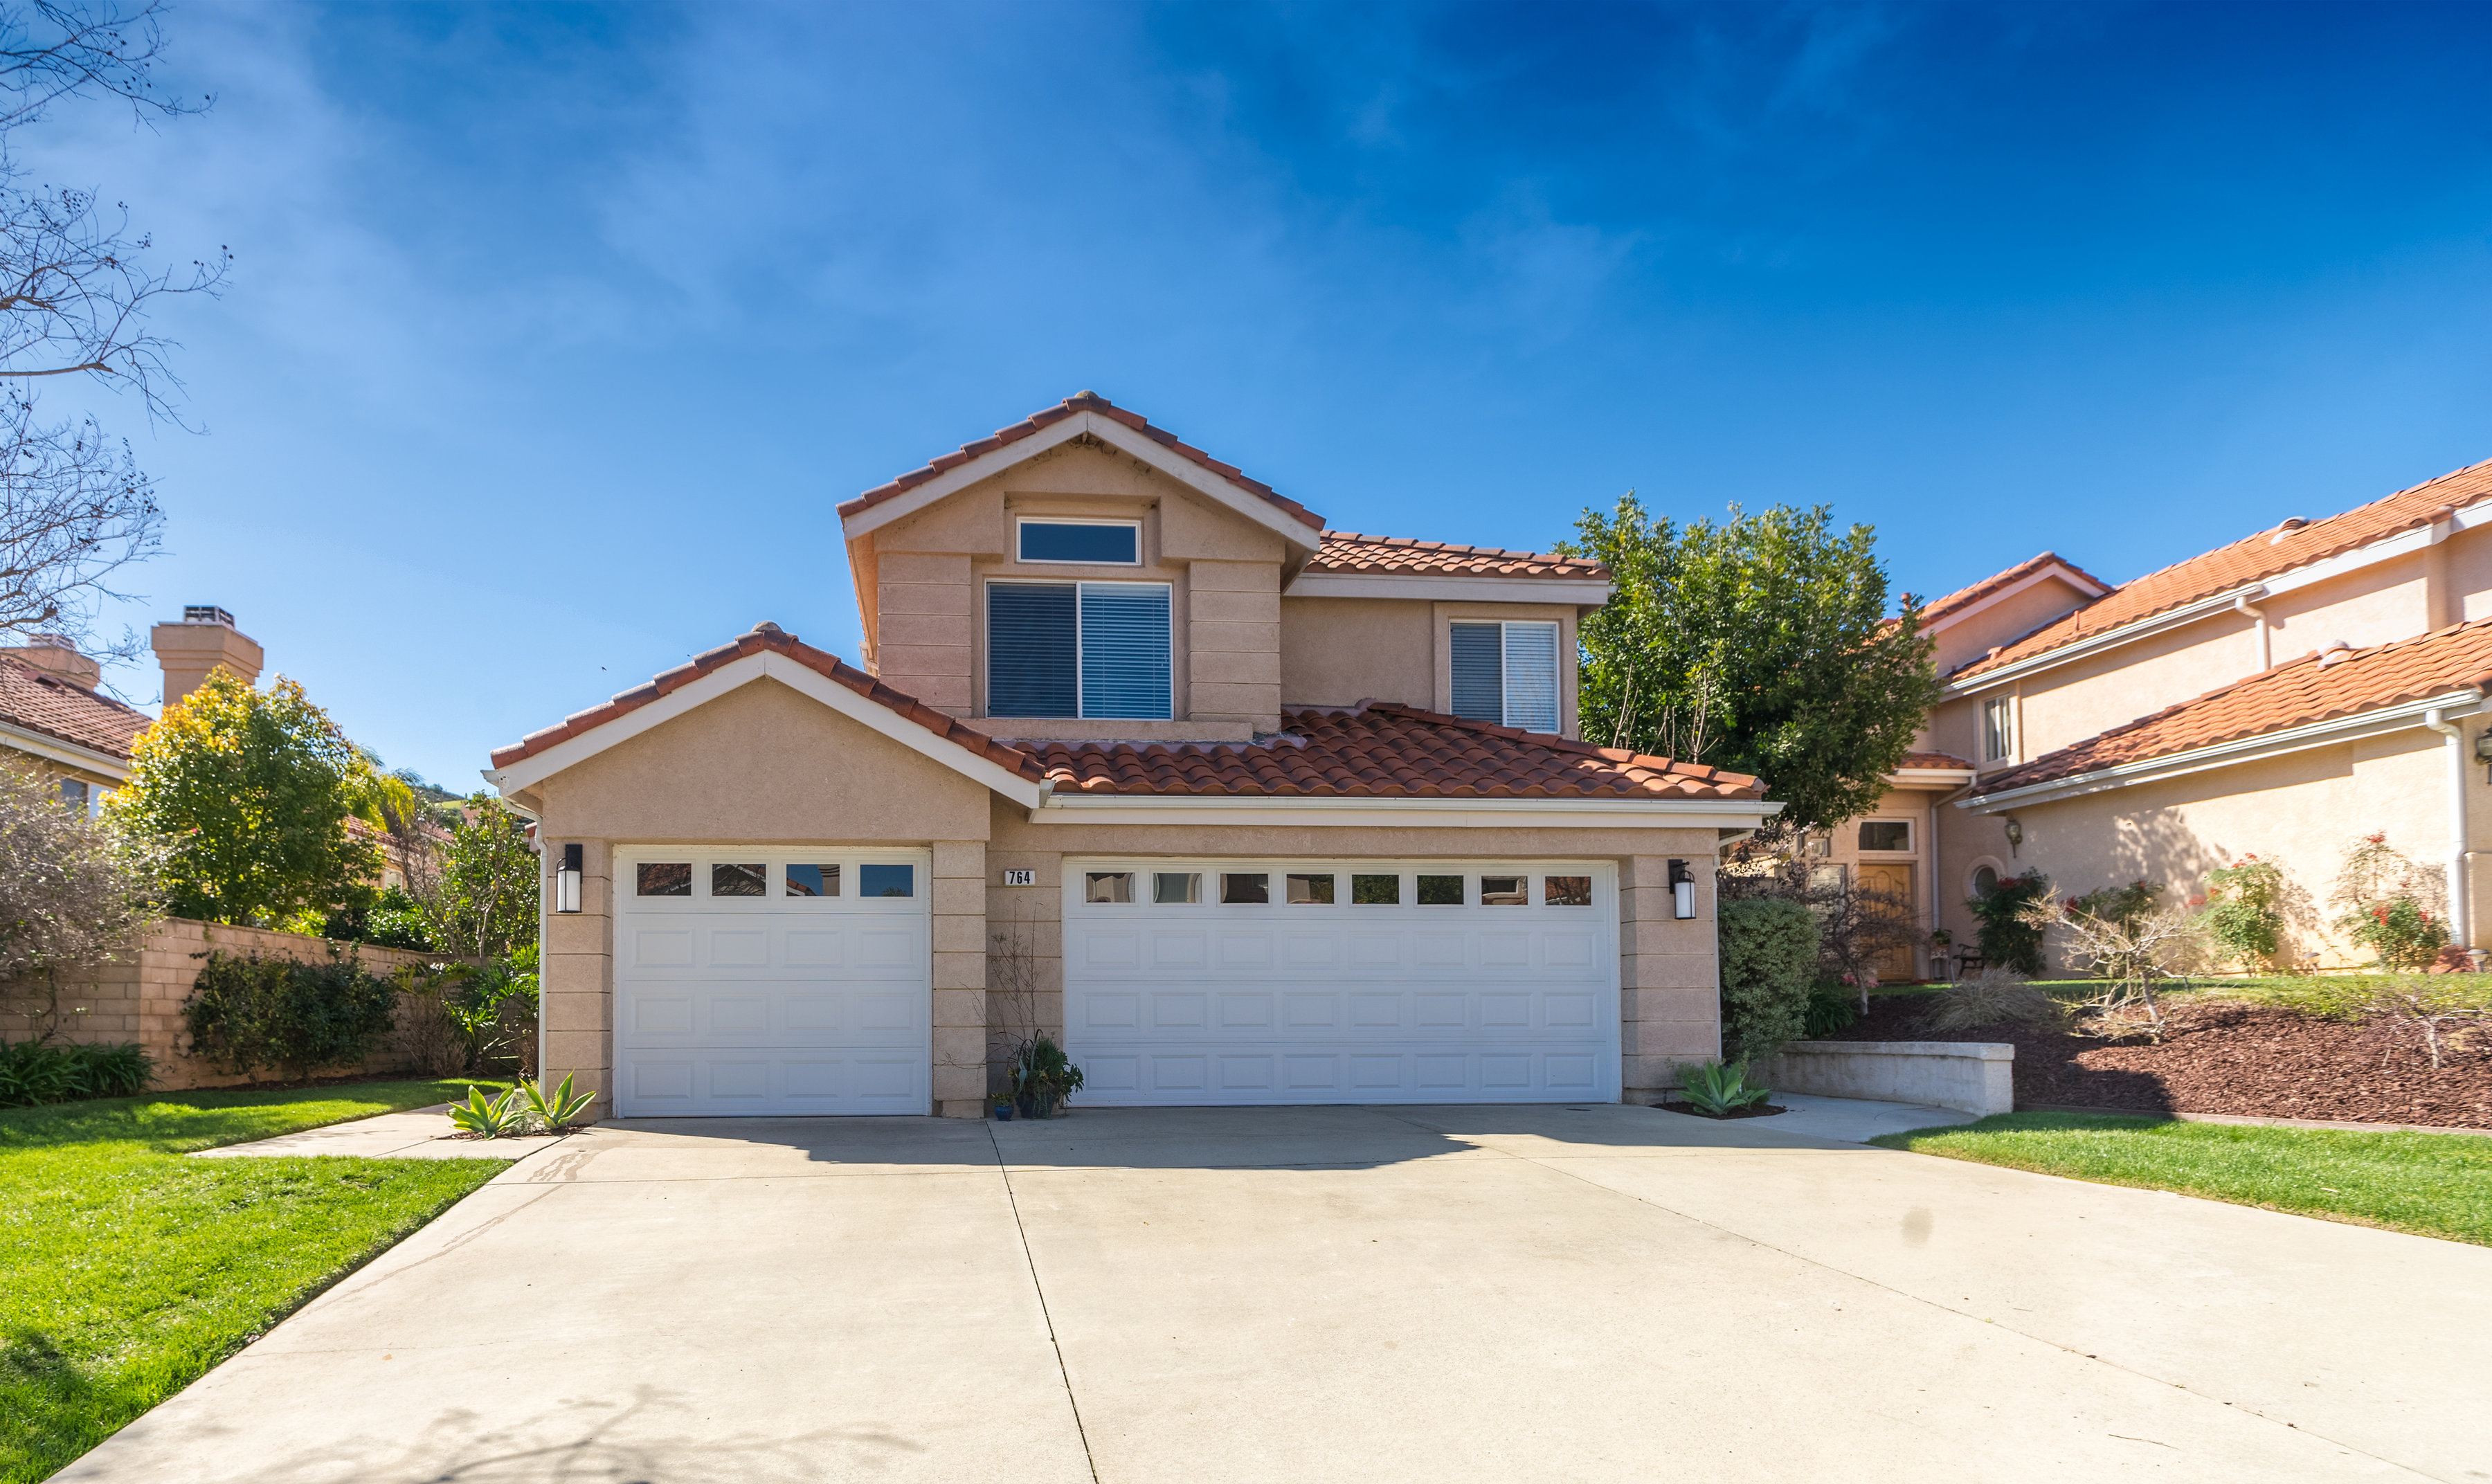 764 Cranmont Court, Simi Valley (Wood Ranch), CA 93065